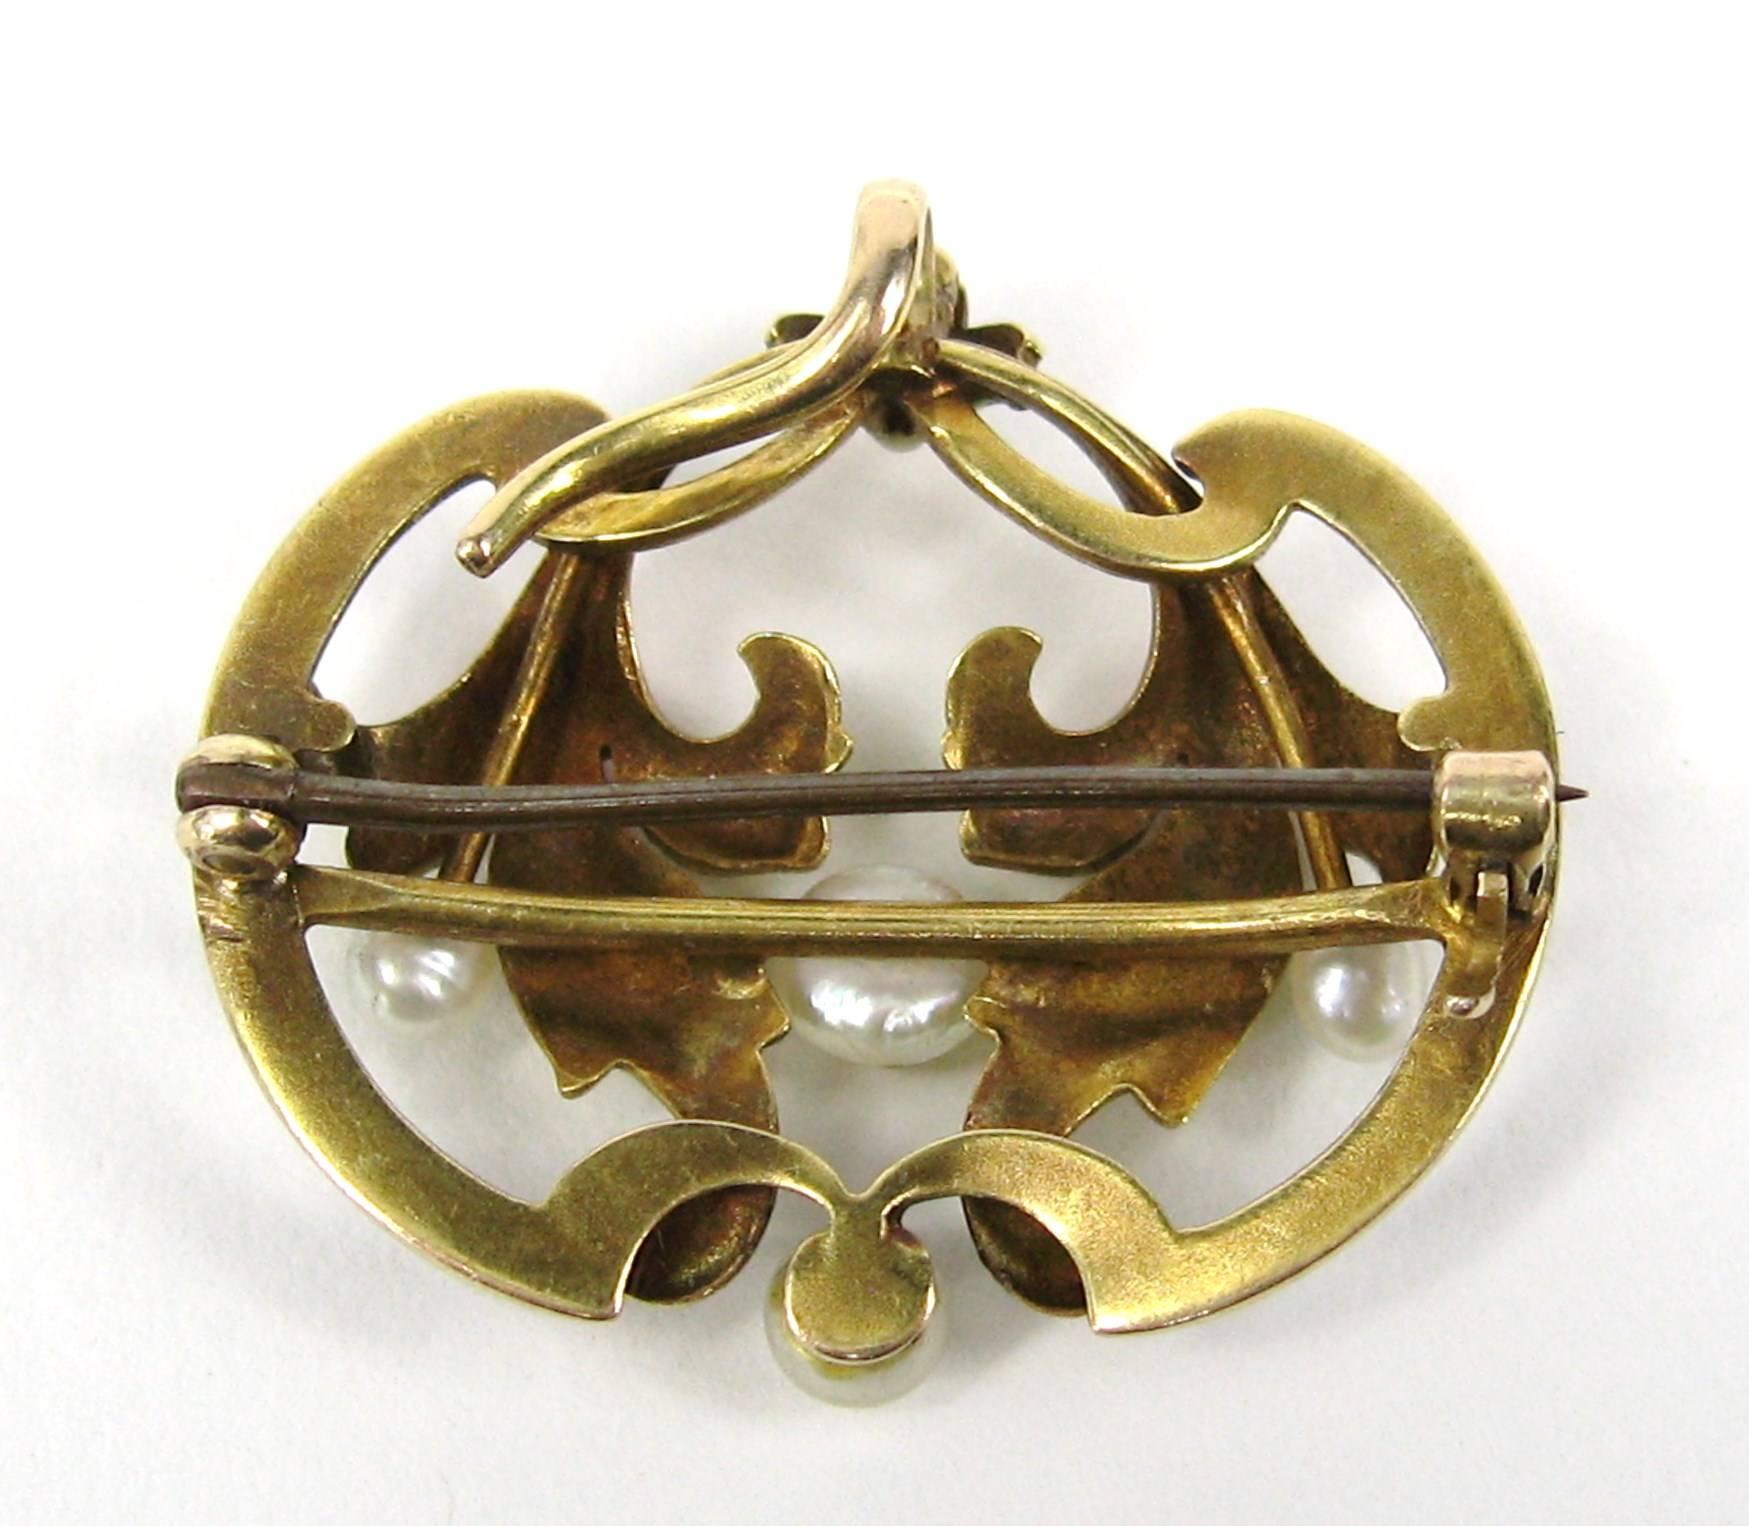 Stunning Pastel enamel work on this Art Nouveau 14K gold Pin & Pendant, 4 pearls largest is 4.36MM. Pendant measures 1.10 in x 1.00 in. Any questions please call or hit request more information. This is out of a massive collection of Contemporary